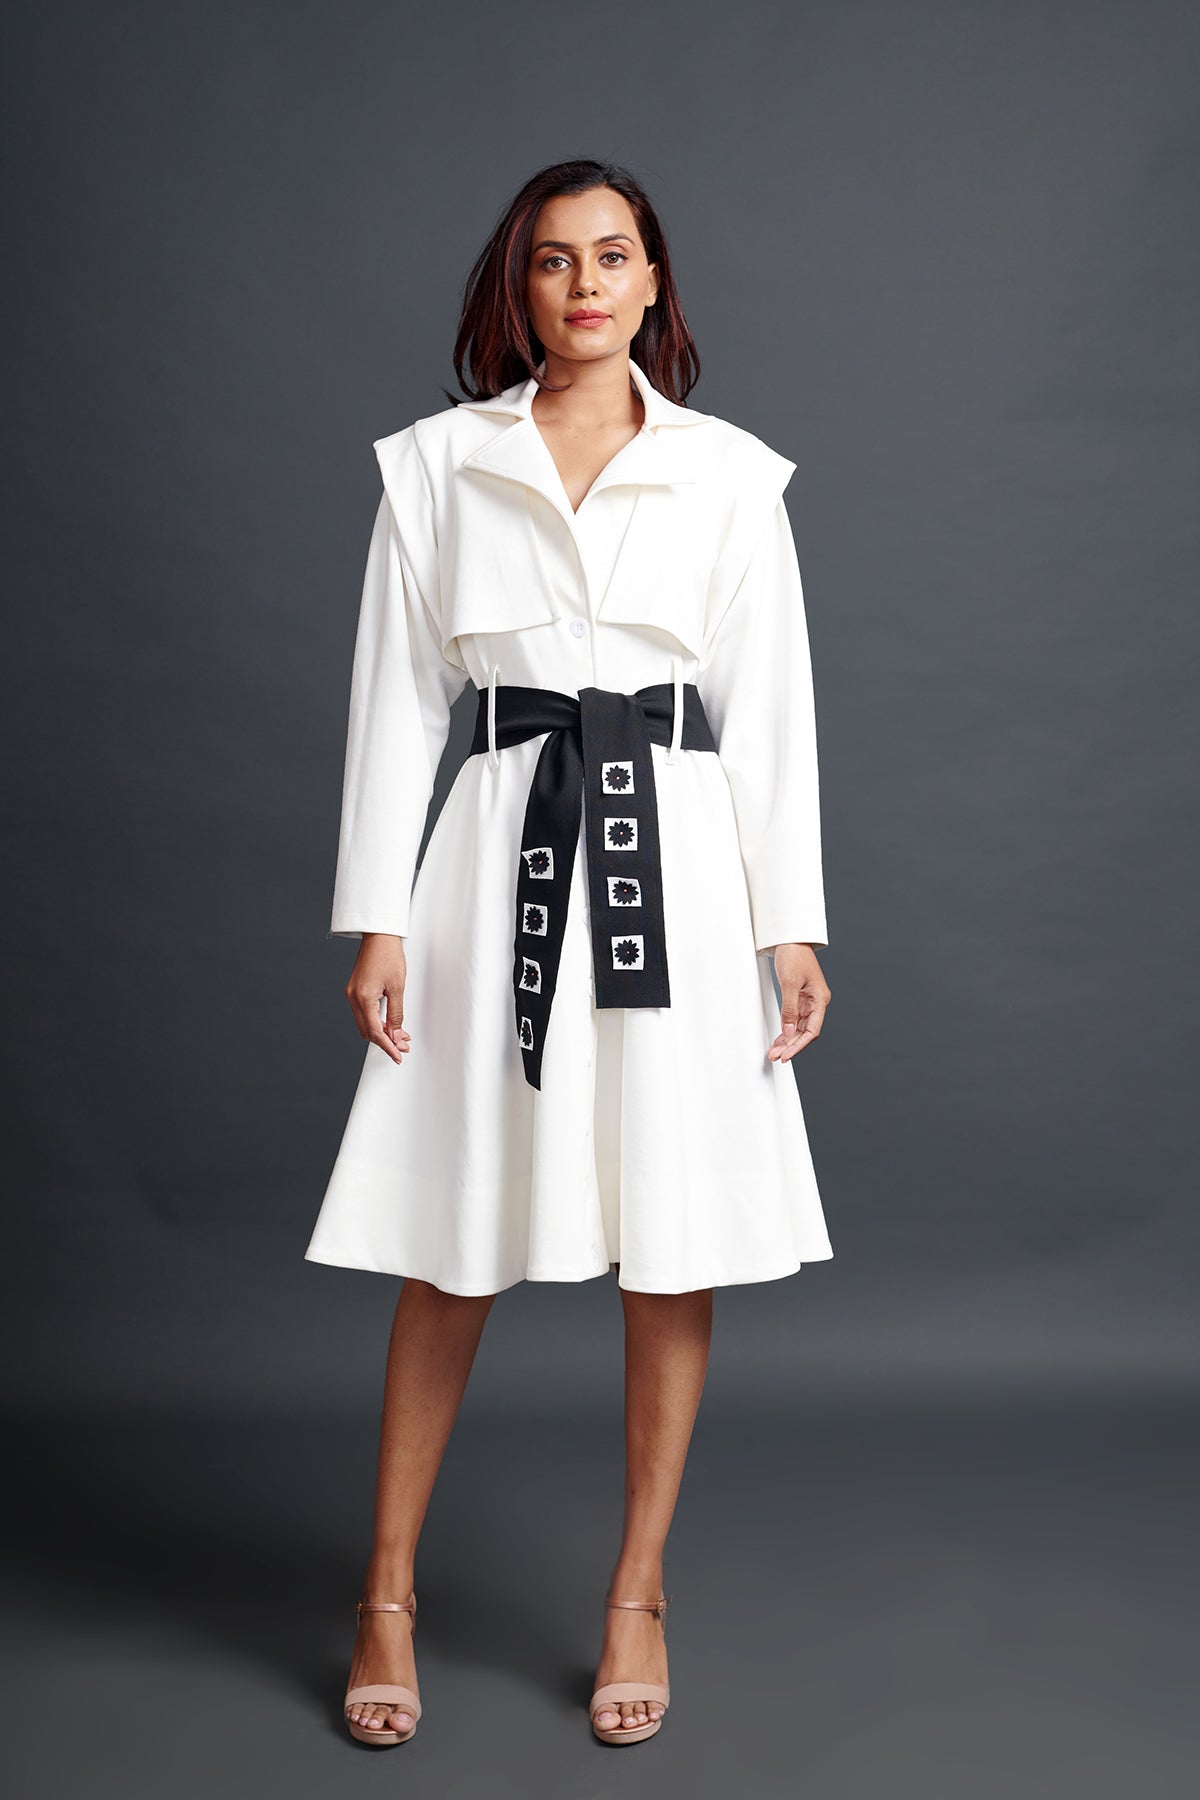 Image of WHITE A SUMURAI INSPIRED JACKET DRESS WITH SASH BELT. From savoirfashions.com